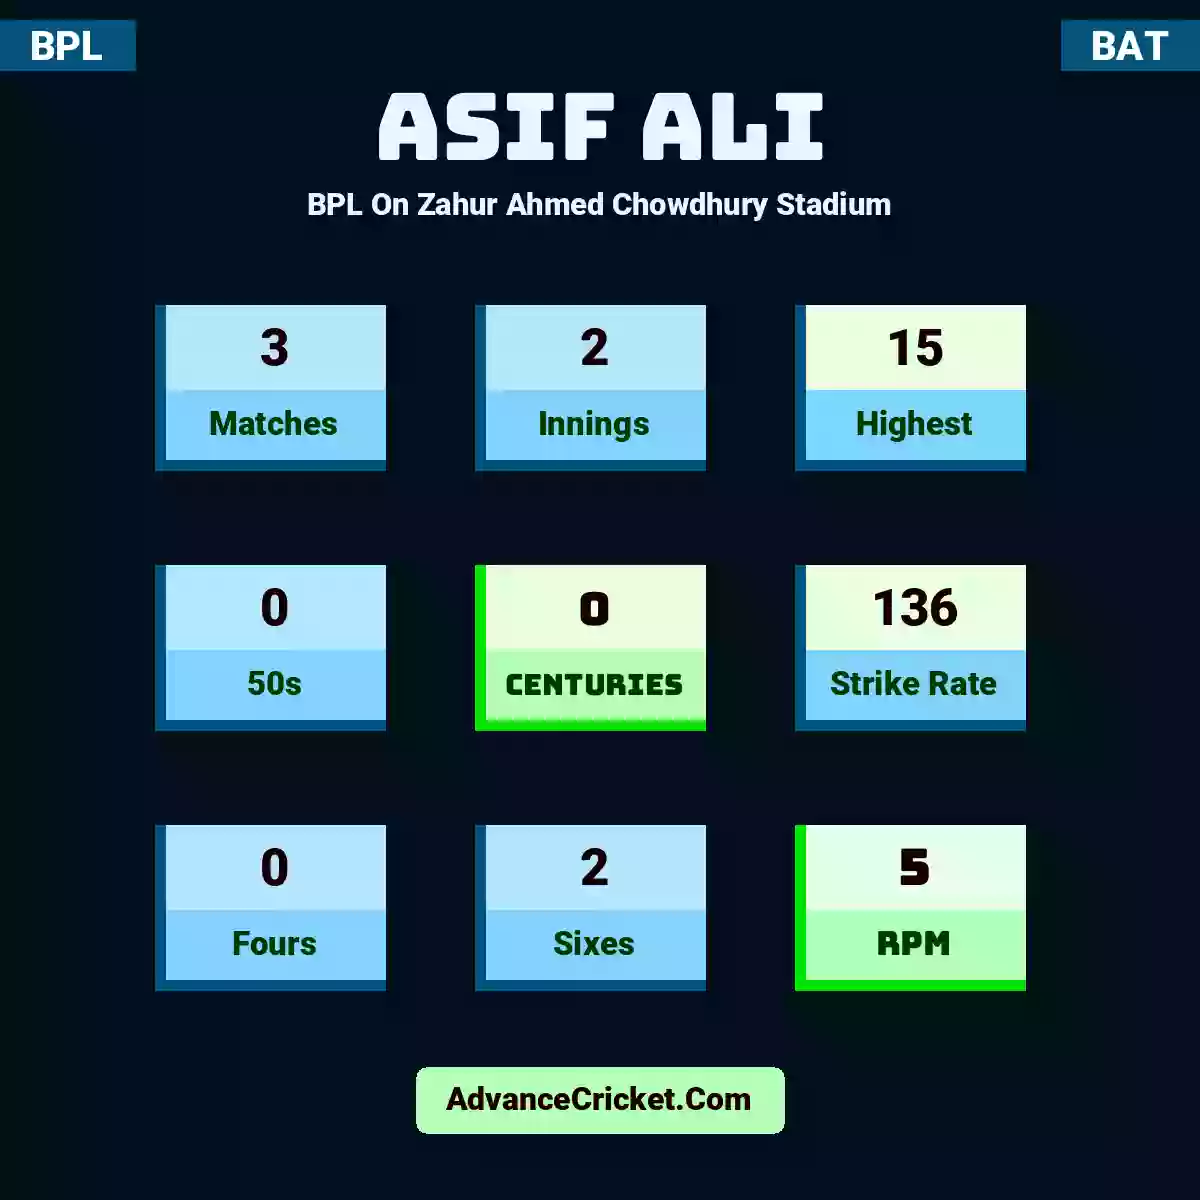 Asif Ali BPL  On Zahur Ahmed Chowdhury Stadium, Asif Ali played 3 matches, scored 15 runs as highest, 0 half-centuries, and 0 centuries, with a strike rate of 136. A.Ali hit 0 fours and 2 sixes, with an RPM of 5.